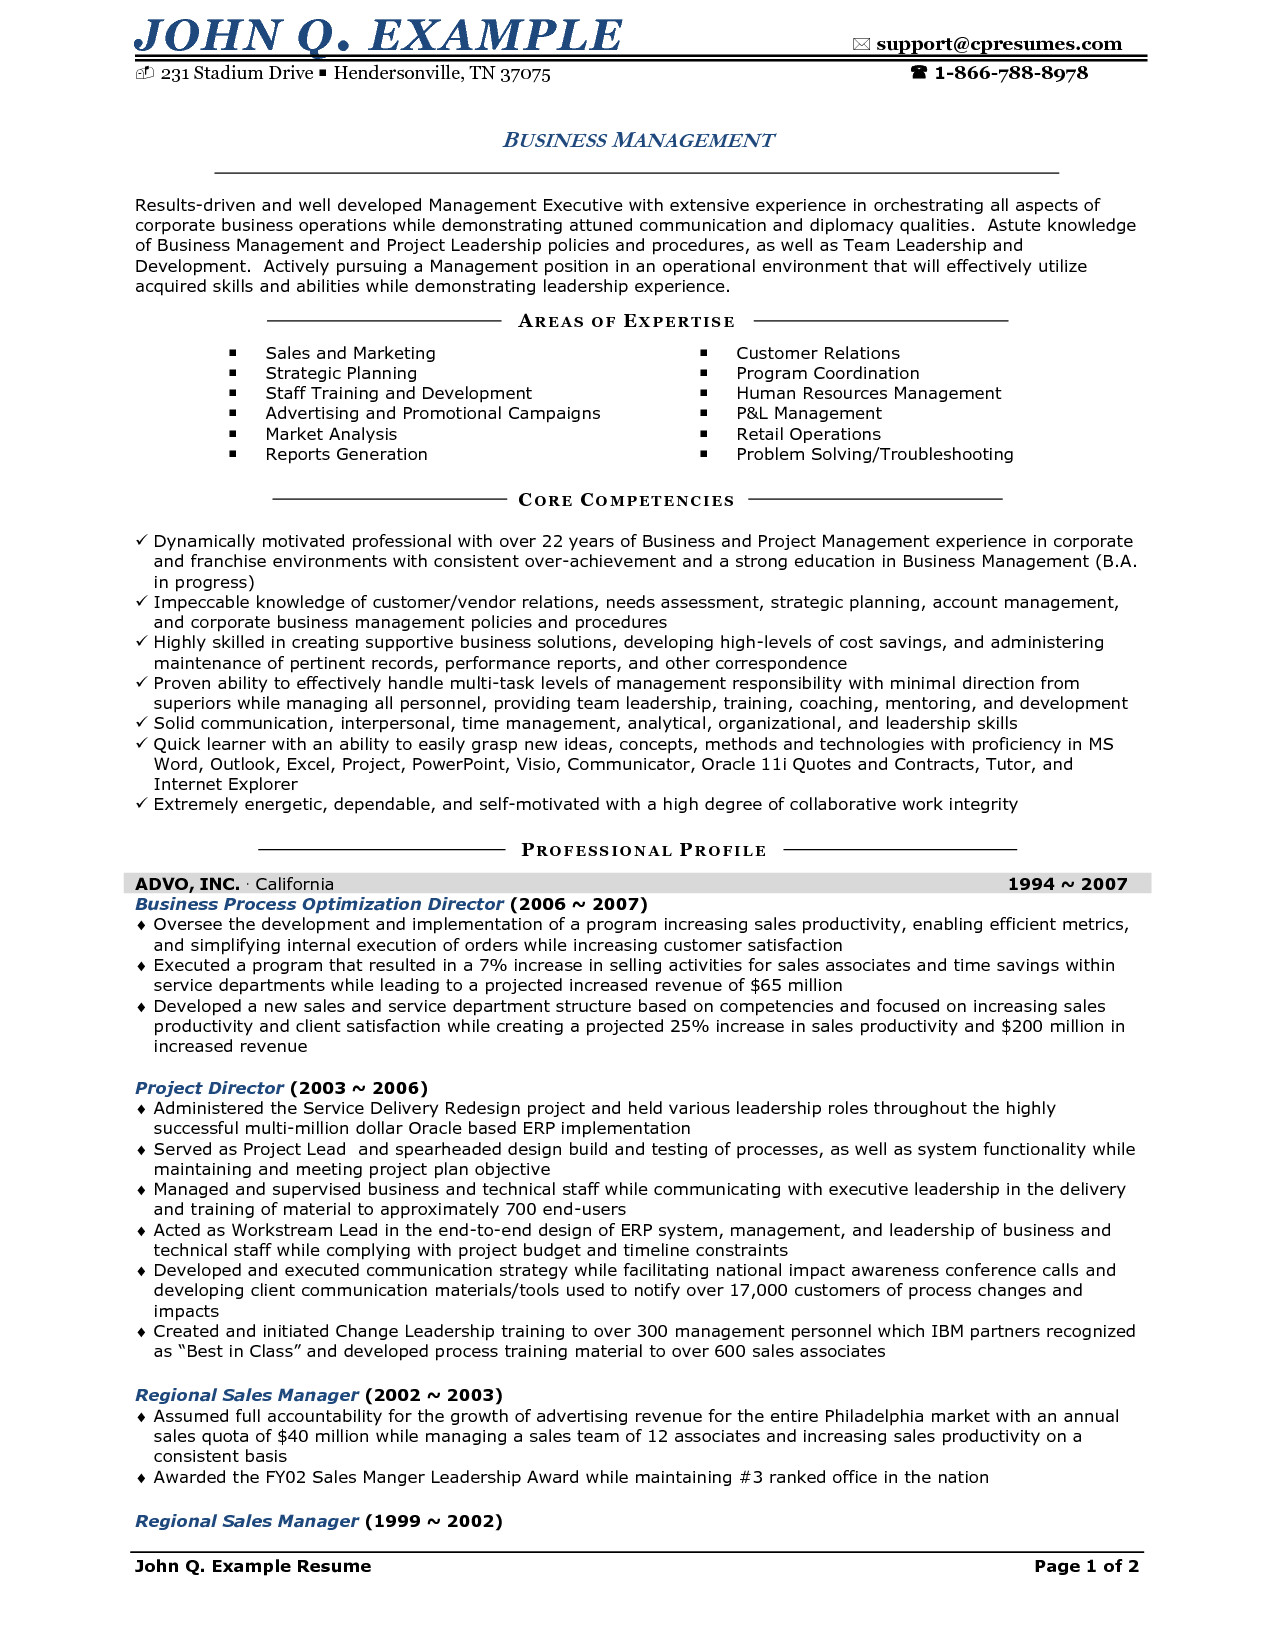 Resume For Owner Small Business Resume Ideas